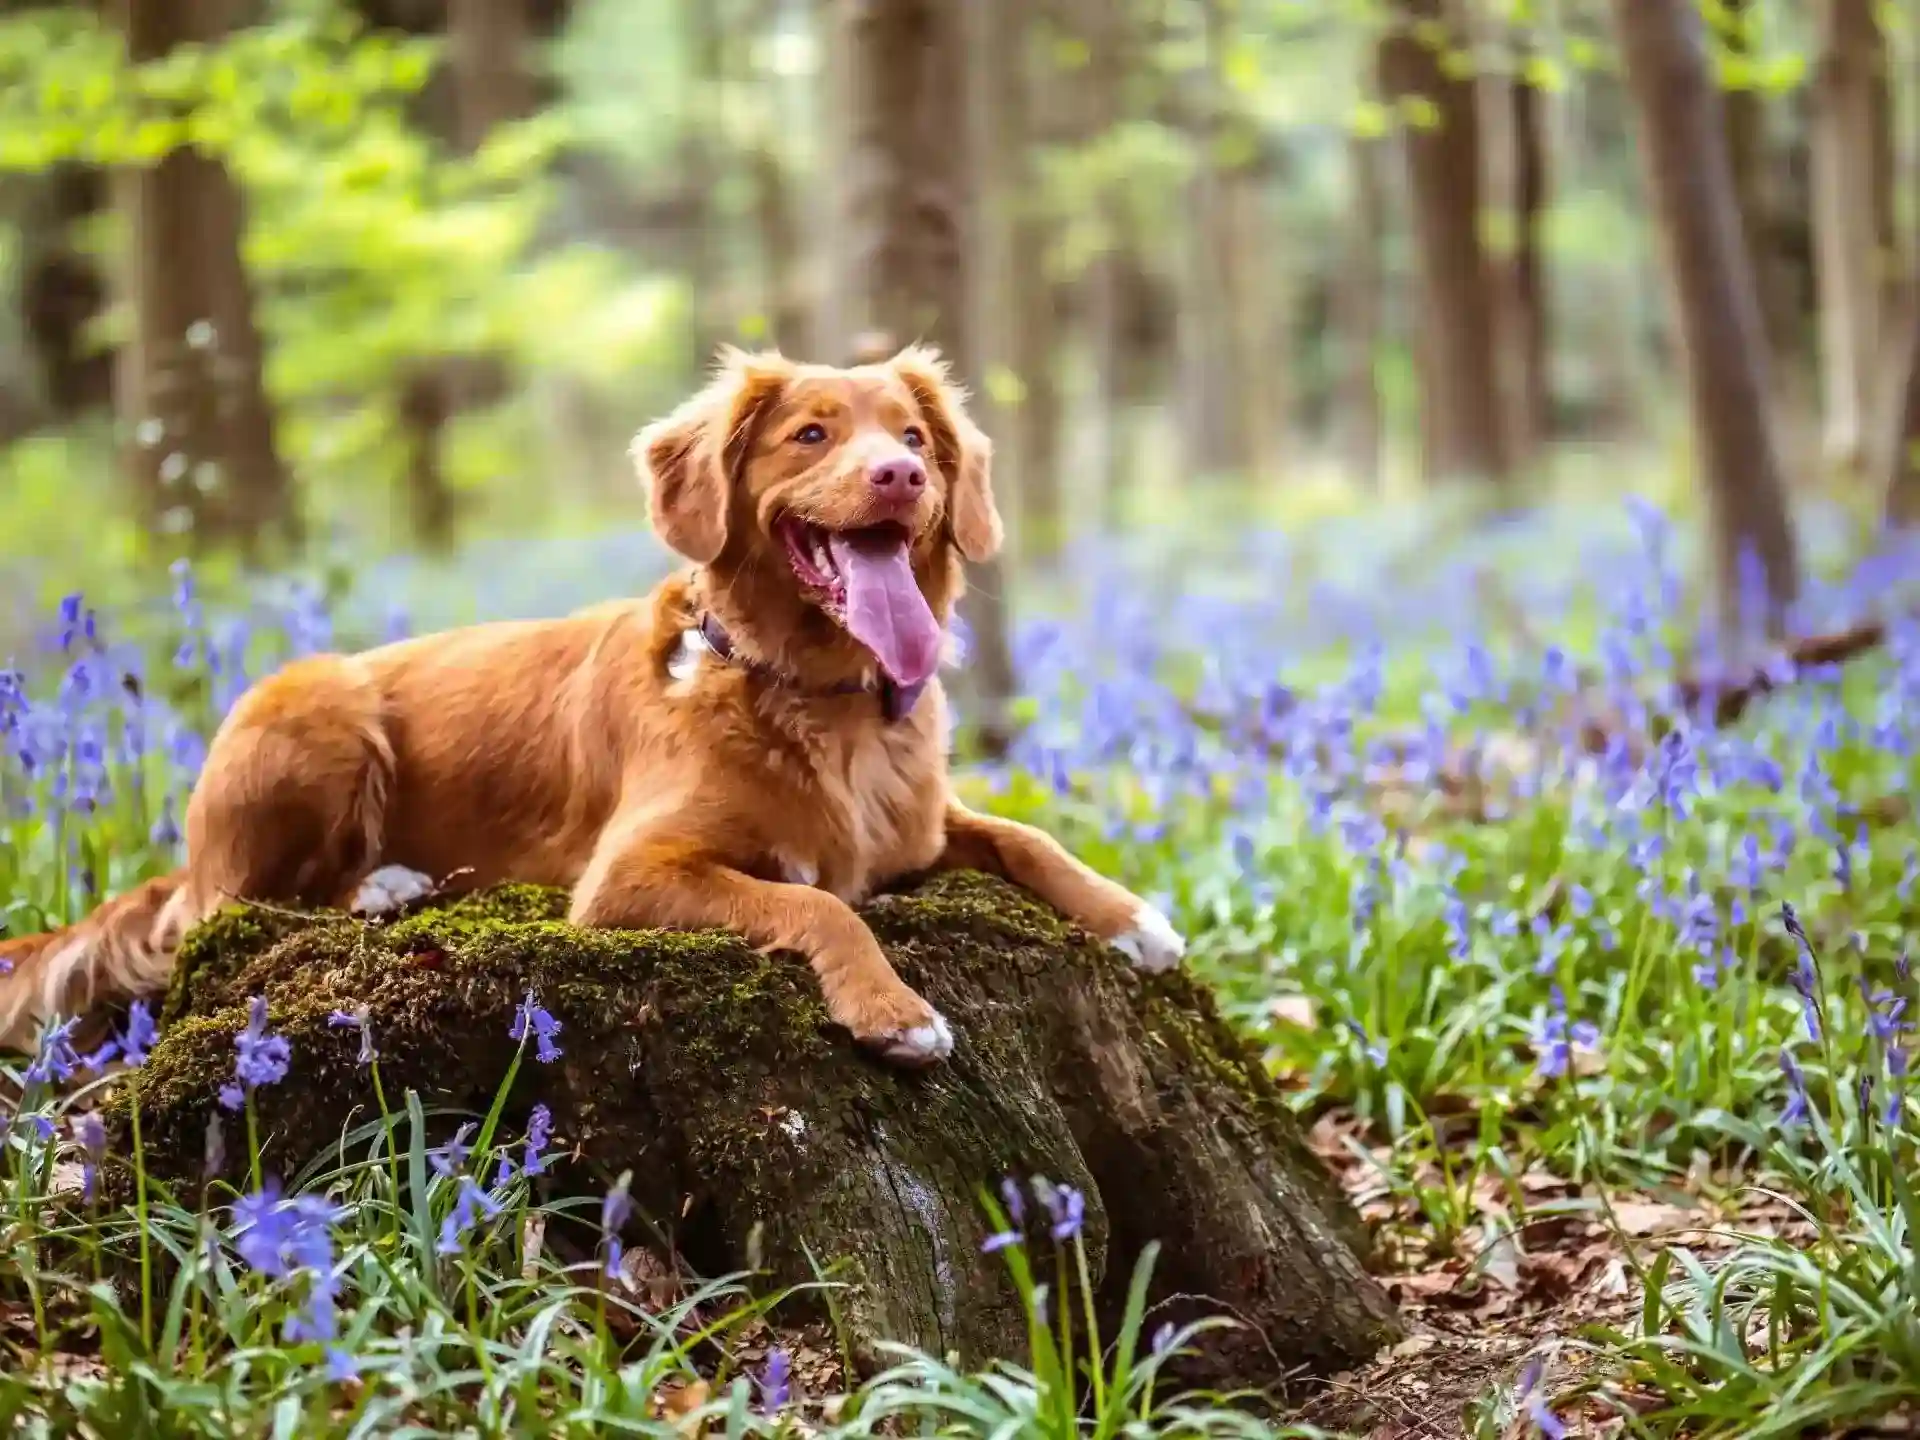 Brown dog resting in a forest